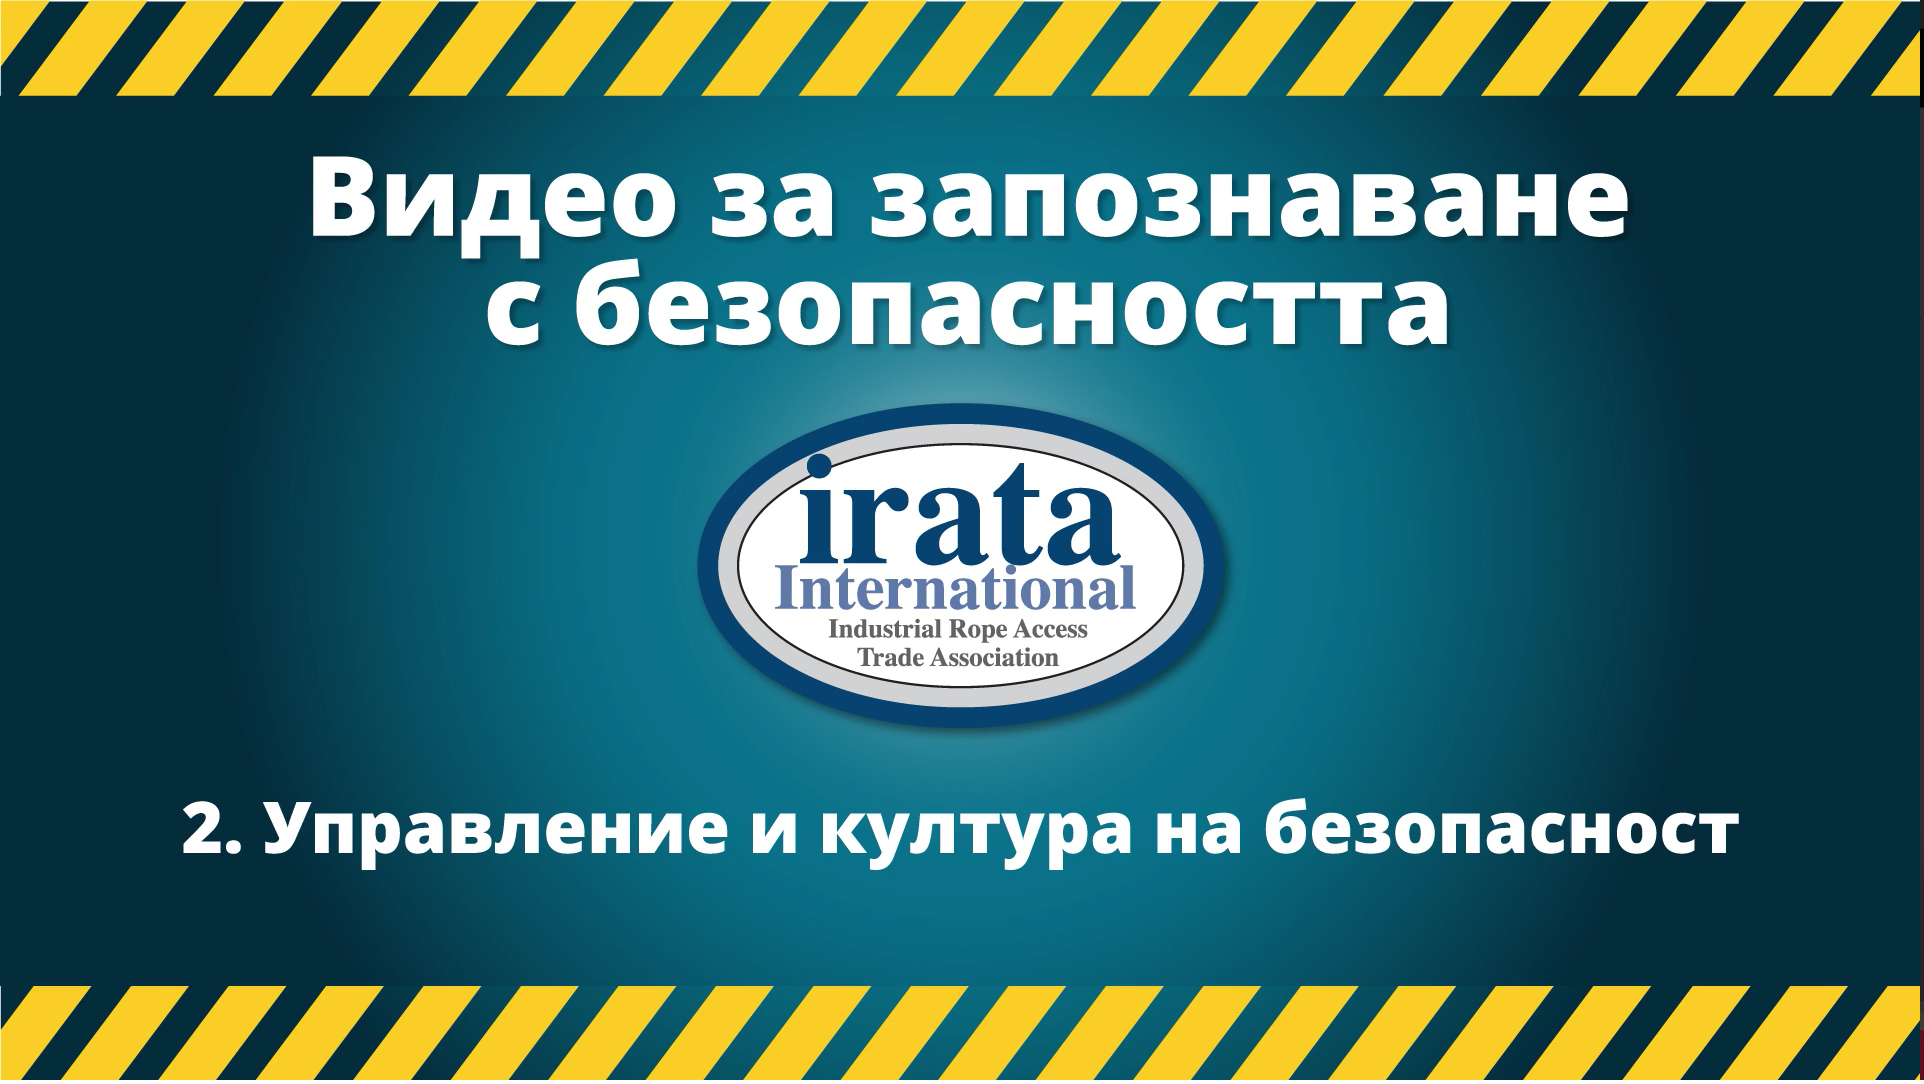 SAFETY AWARENESS VIDEO - management and safety culture - Bulgarian SUBTITLES